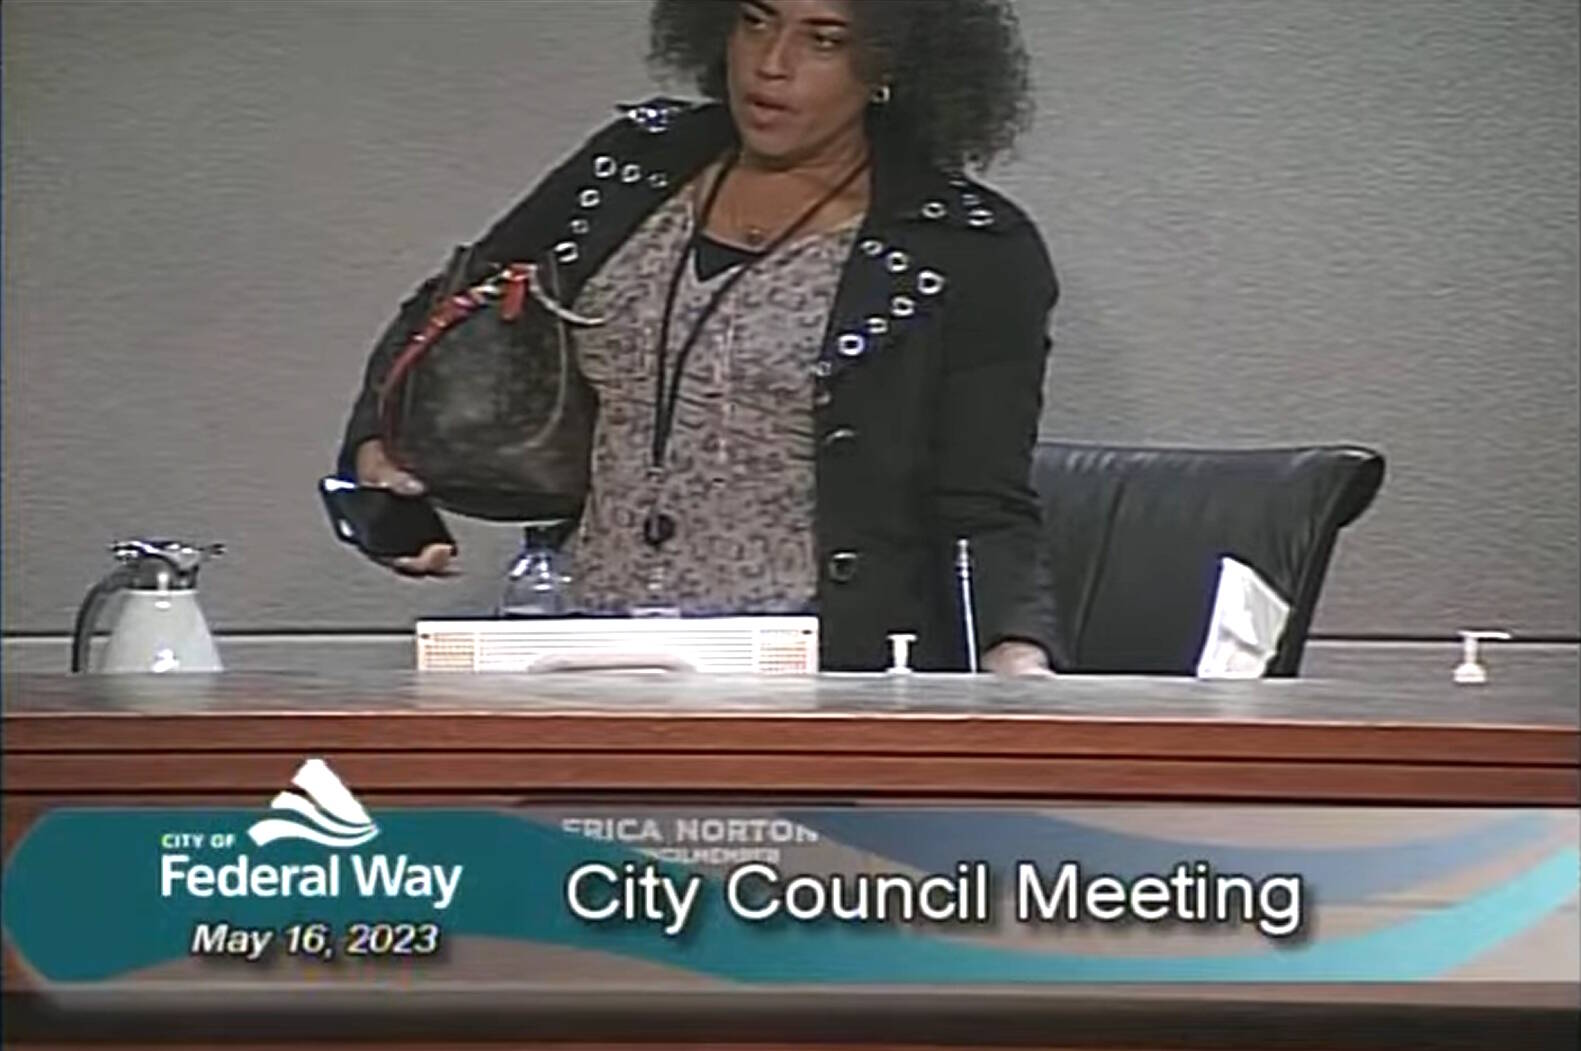 Erica Norton announces her immediate resignation from the Federal Way City Council during the May 16 council meeting. Photo via Federal Way YouTube page.